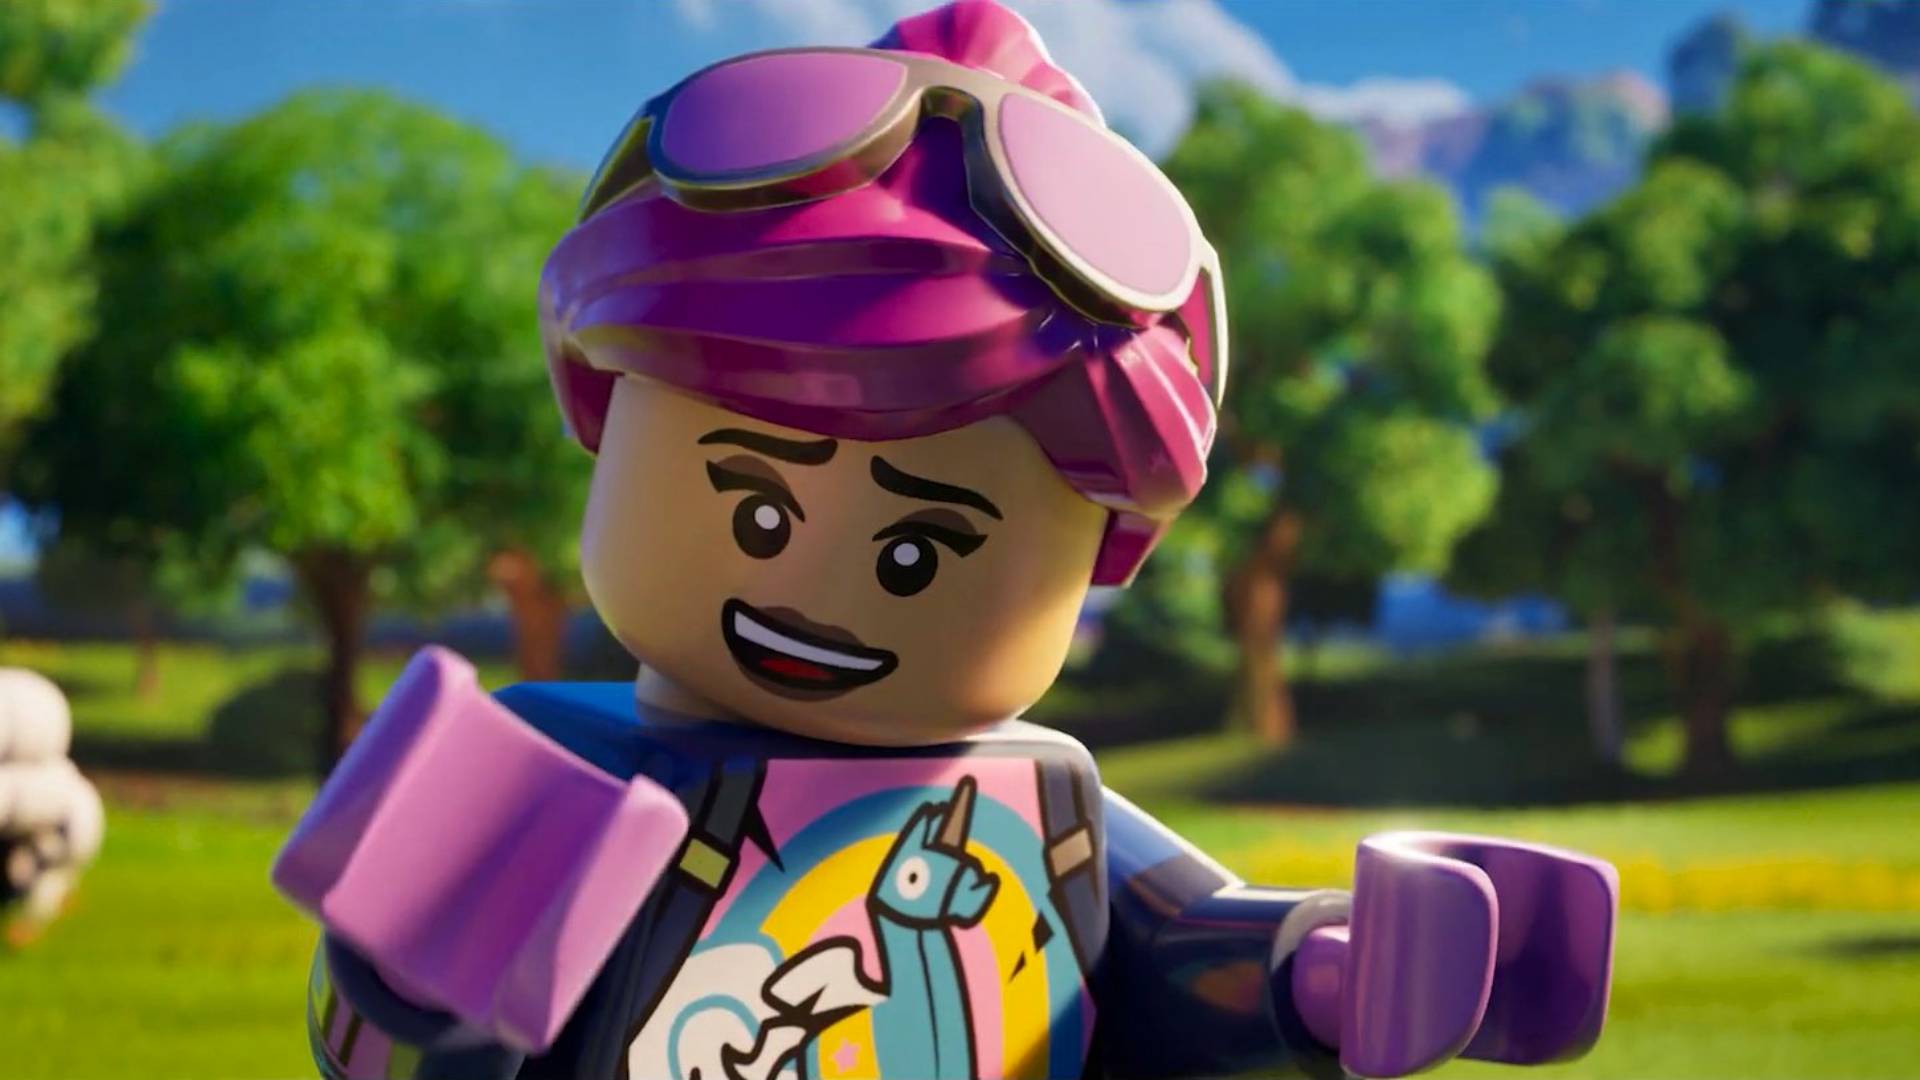 Fortnite Launches LEGO Fortnite, Rocket Racing, and Fortnite Festival – All  Out Now - Xbox Wire